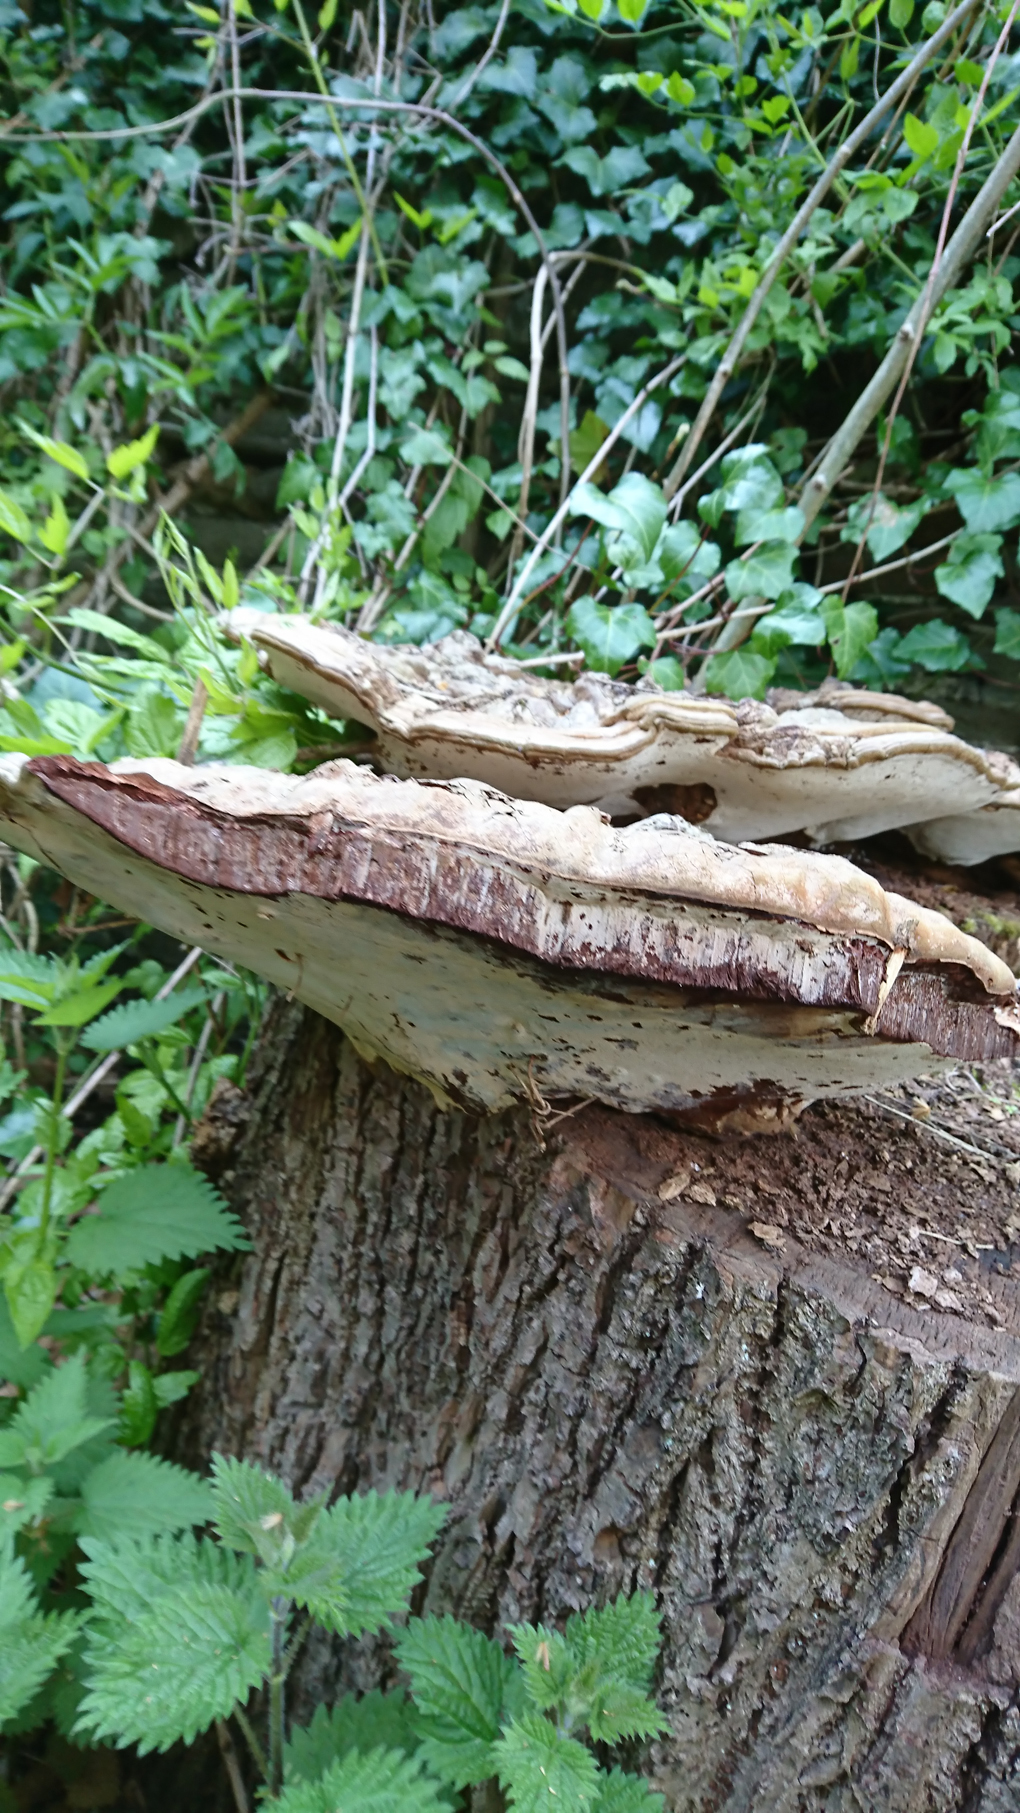 A great find - two giant Polypore fungi growing on an old tree stump in a Bristol Sensory Garden near St. Mary Redcliffe church. They measured 37 cms long x 20 cms deep. Humongous!!!